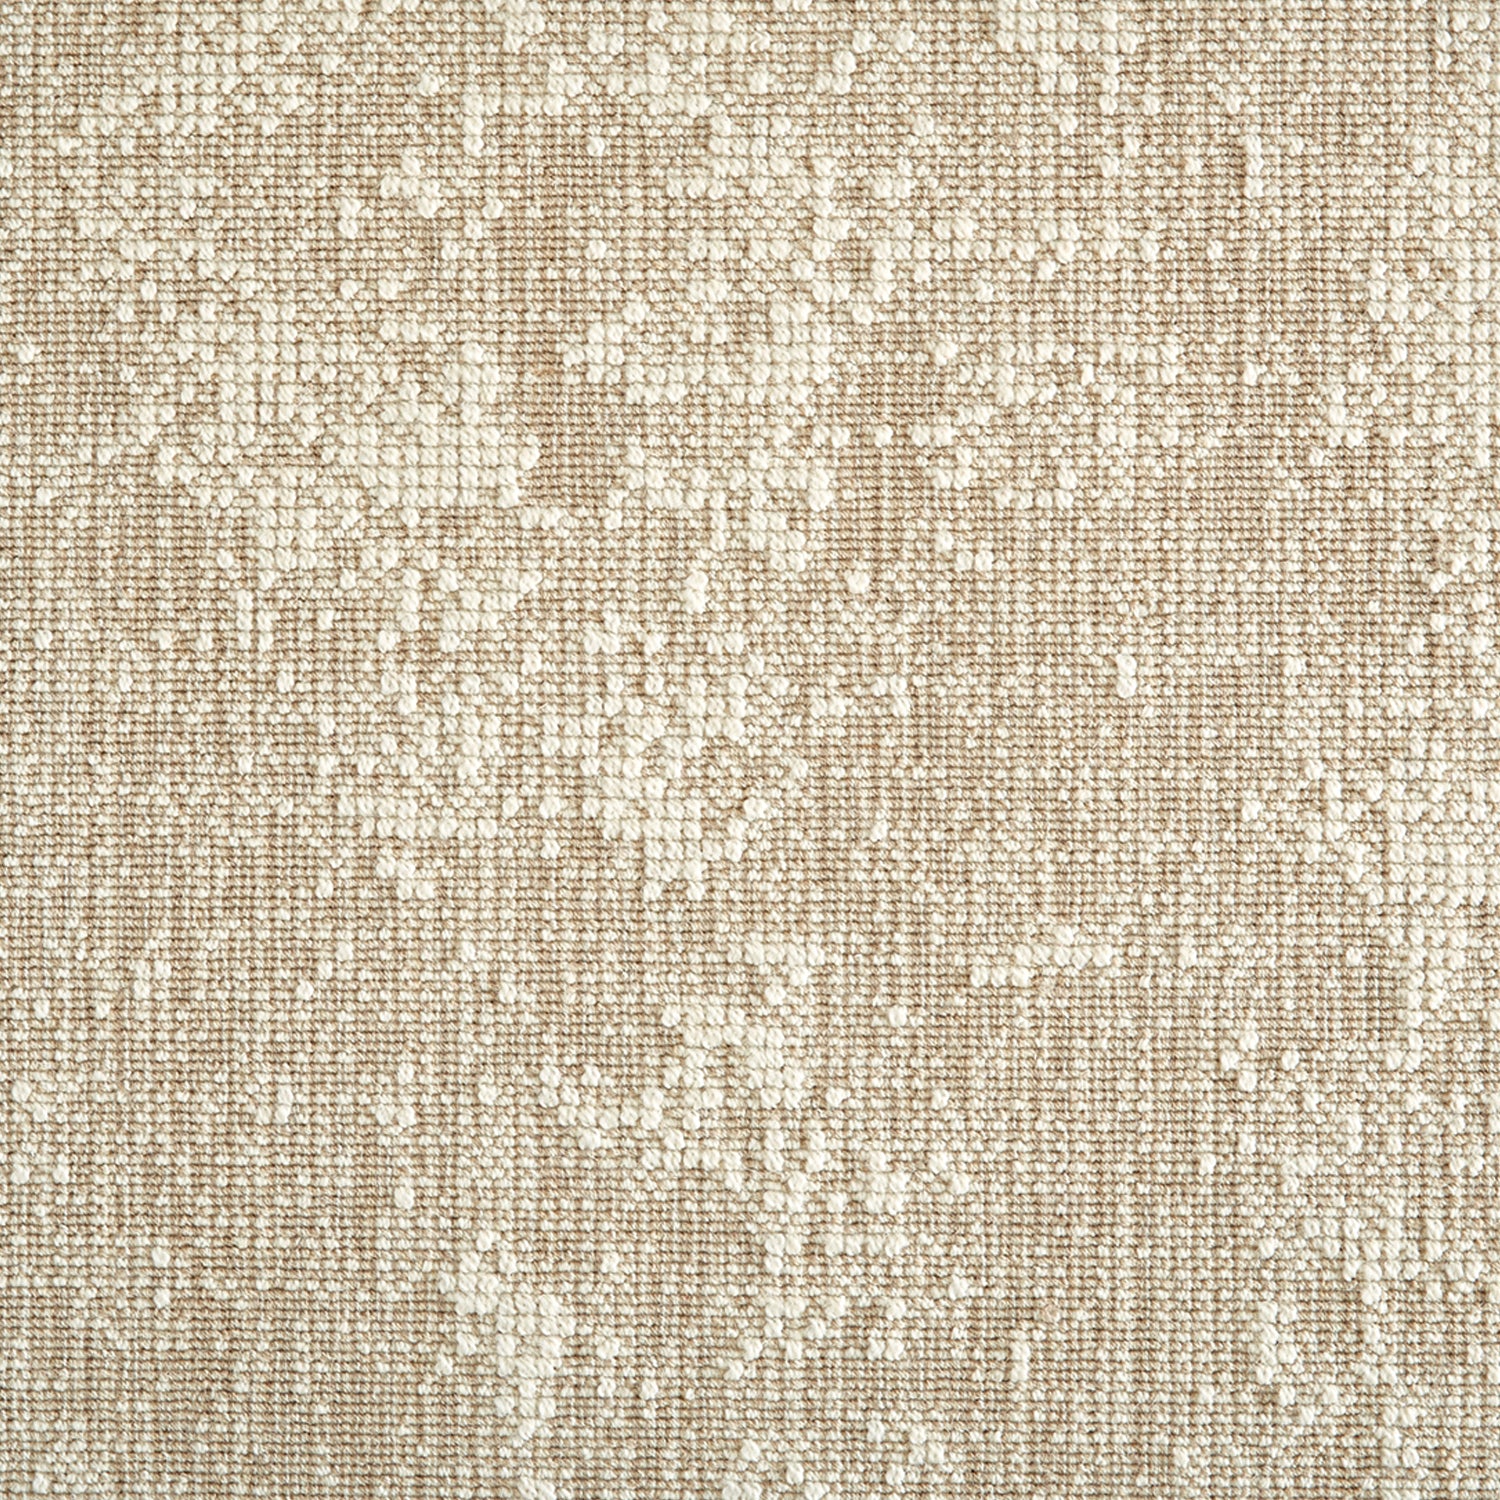 Wool-blend broadloom carpet swatch in a dimensional abstract weave in cream and tan.